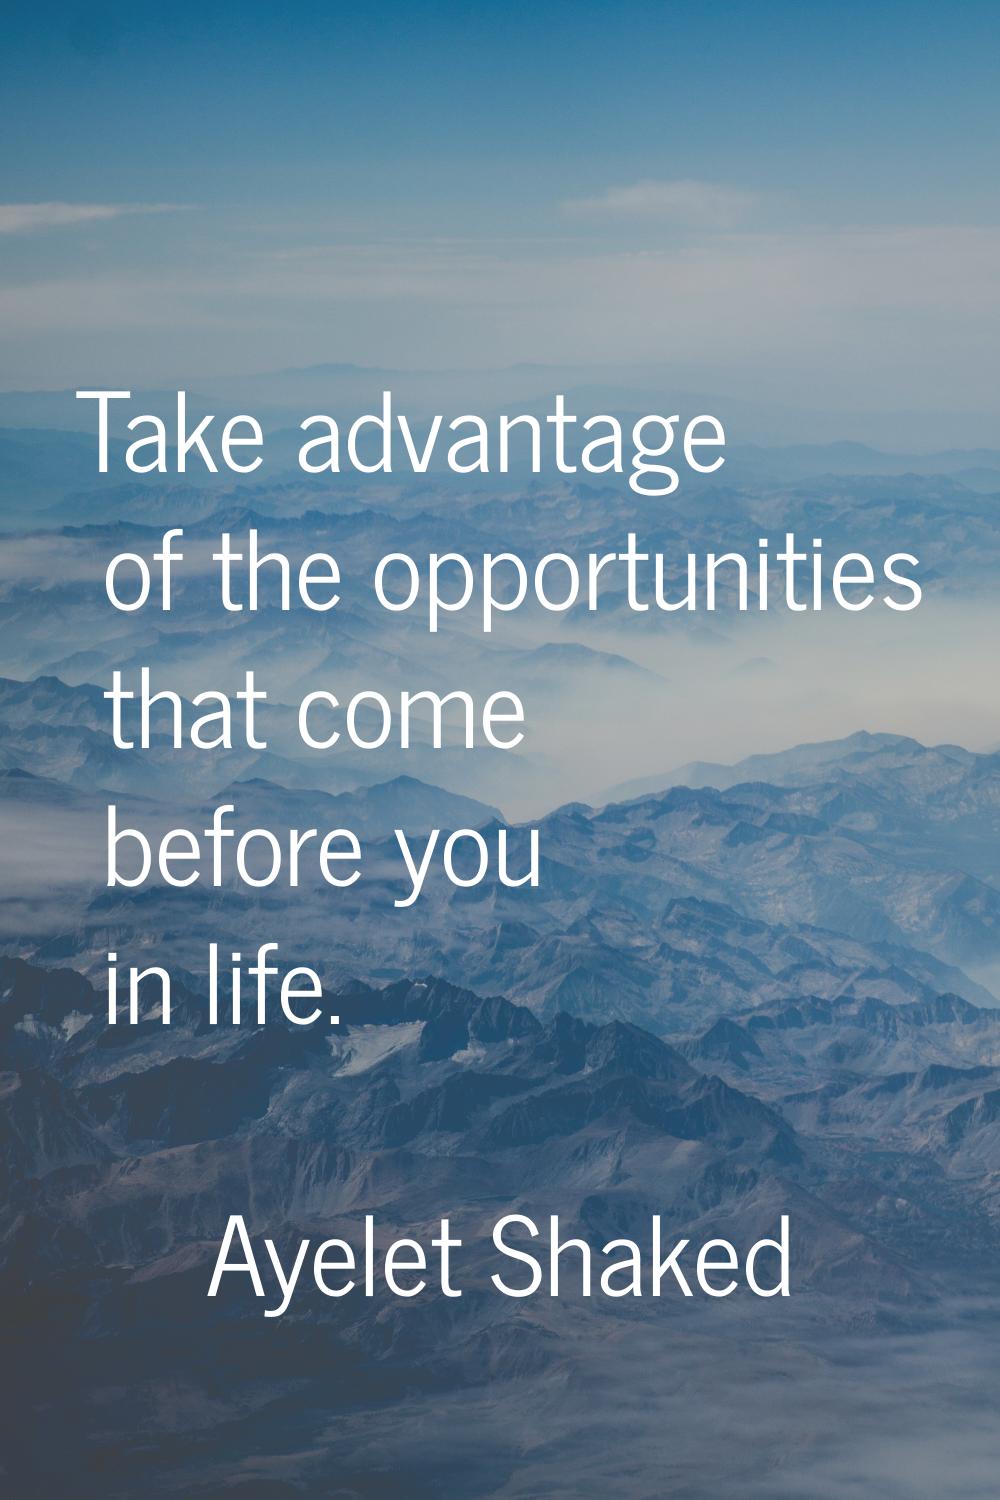 Take advantage of the opportunities that come before you in life.